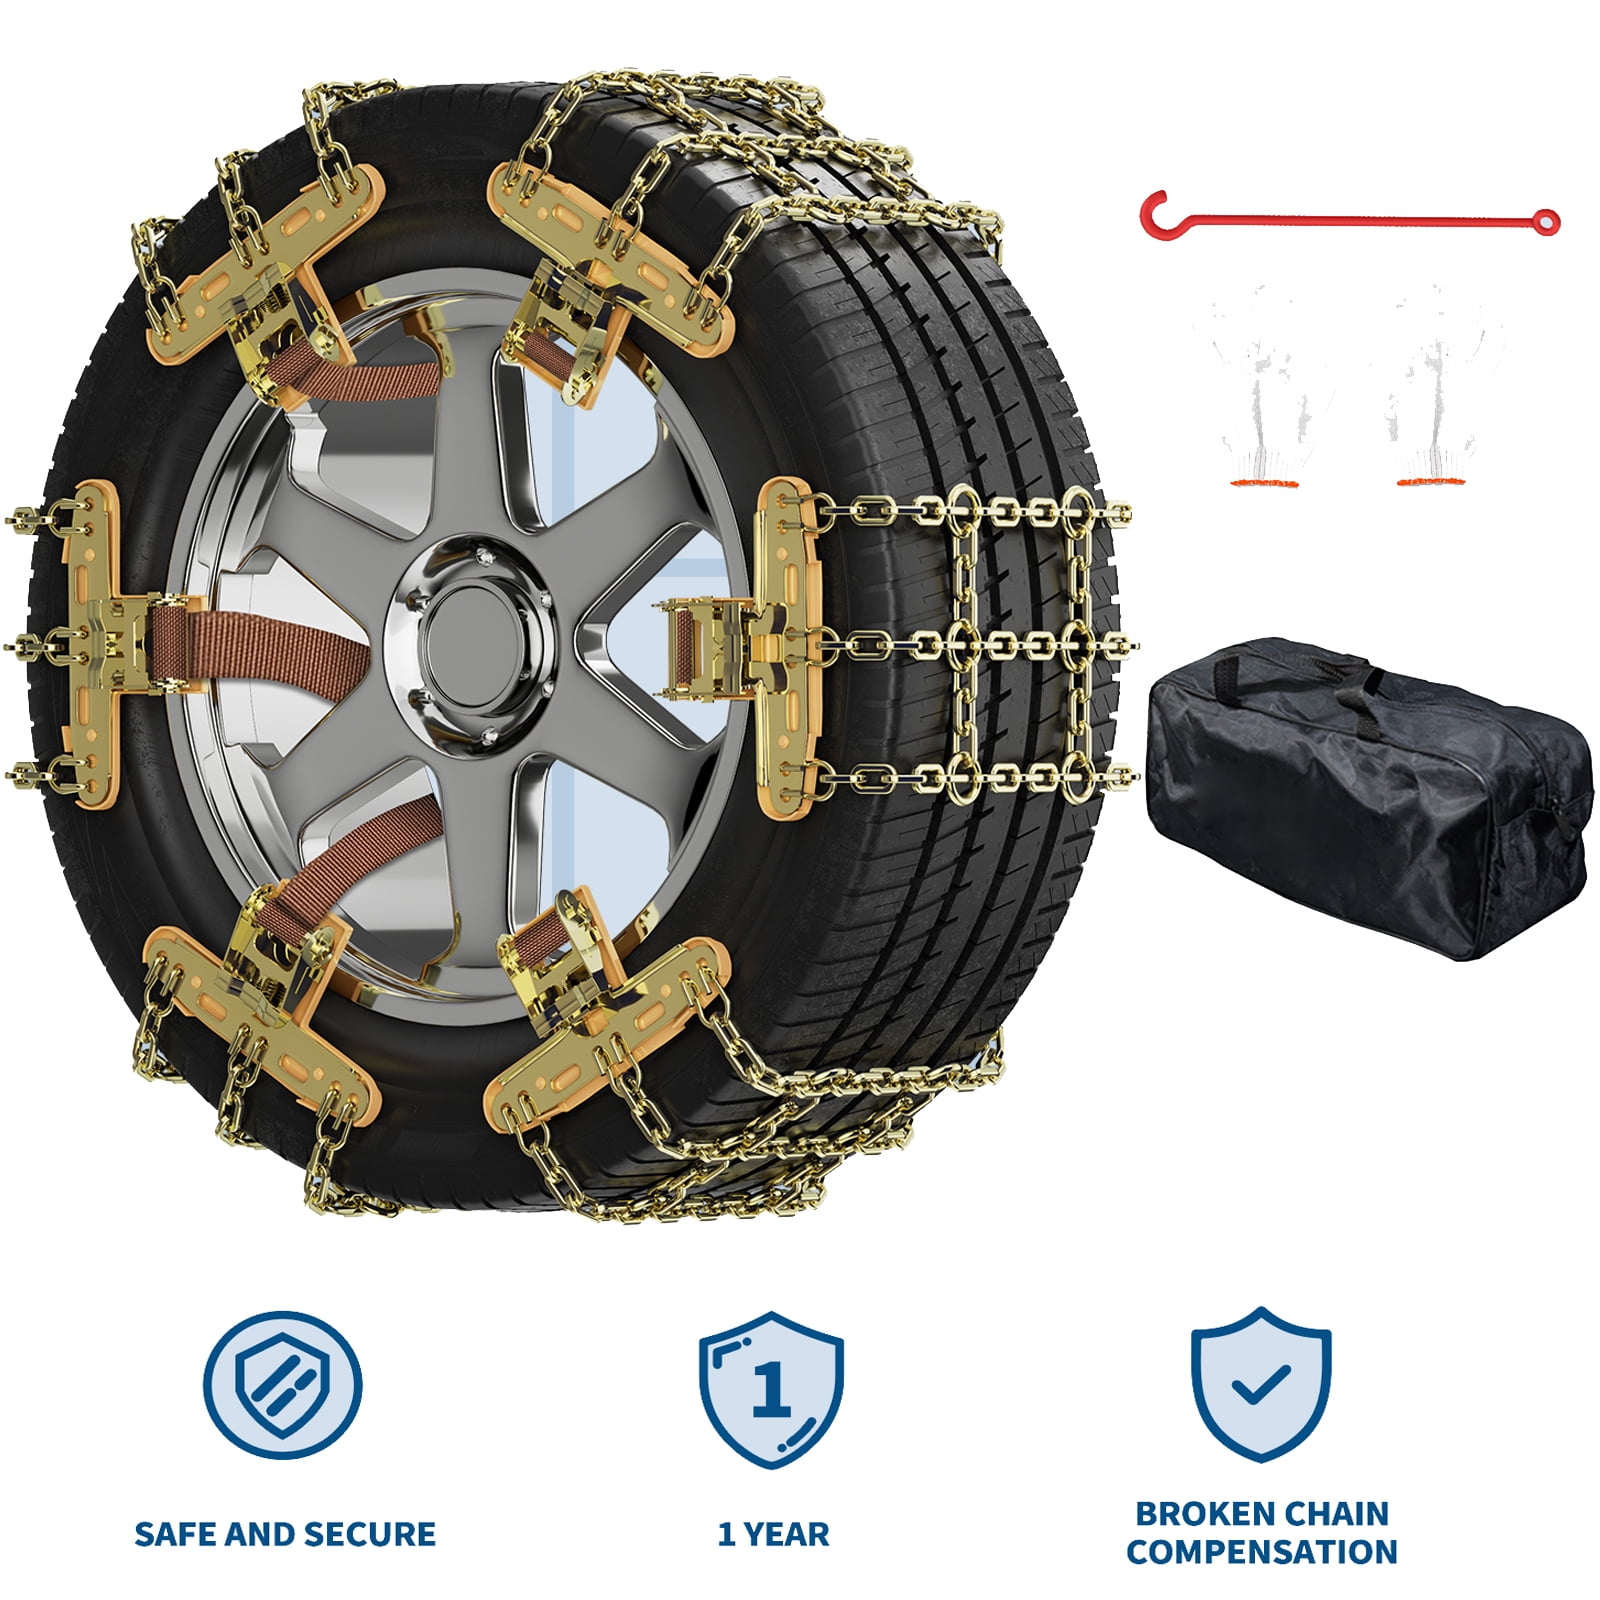 NAIZEA 6 Pack Tire Chain, Adjustable Anti-skid Chain for Tire Width  8.5-11.2, 215-285 mm Snow Chains for Car, SUV, Truck